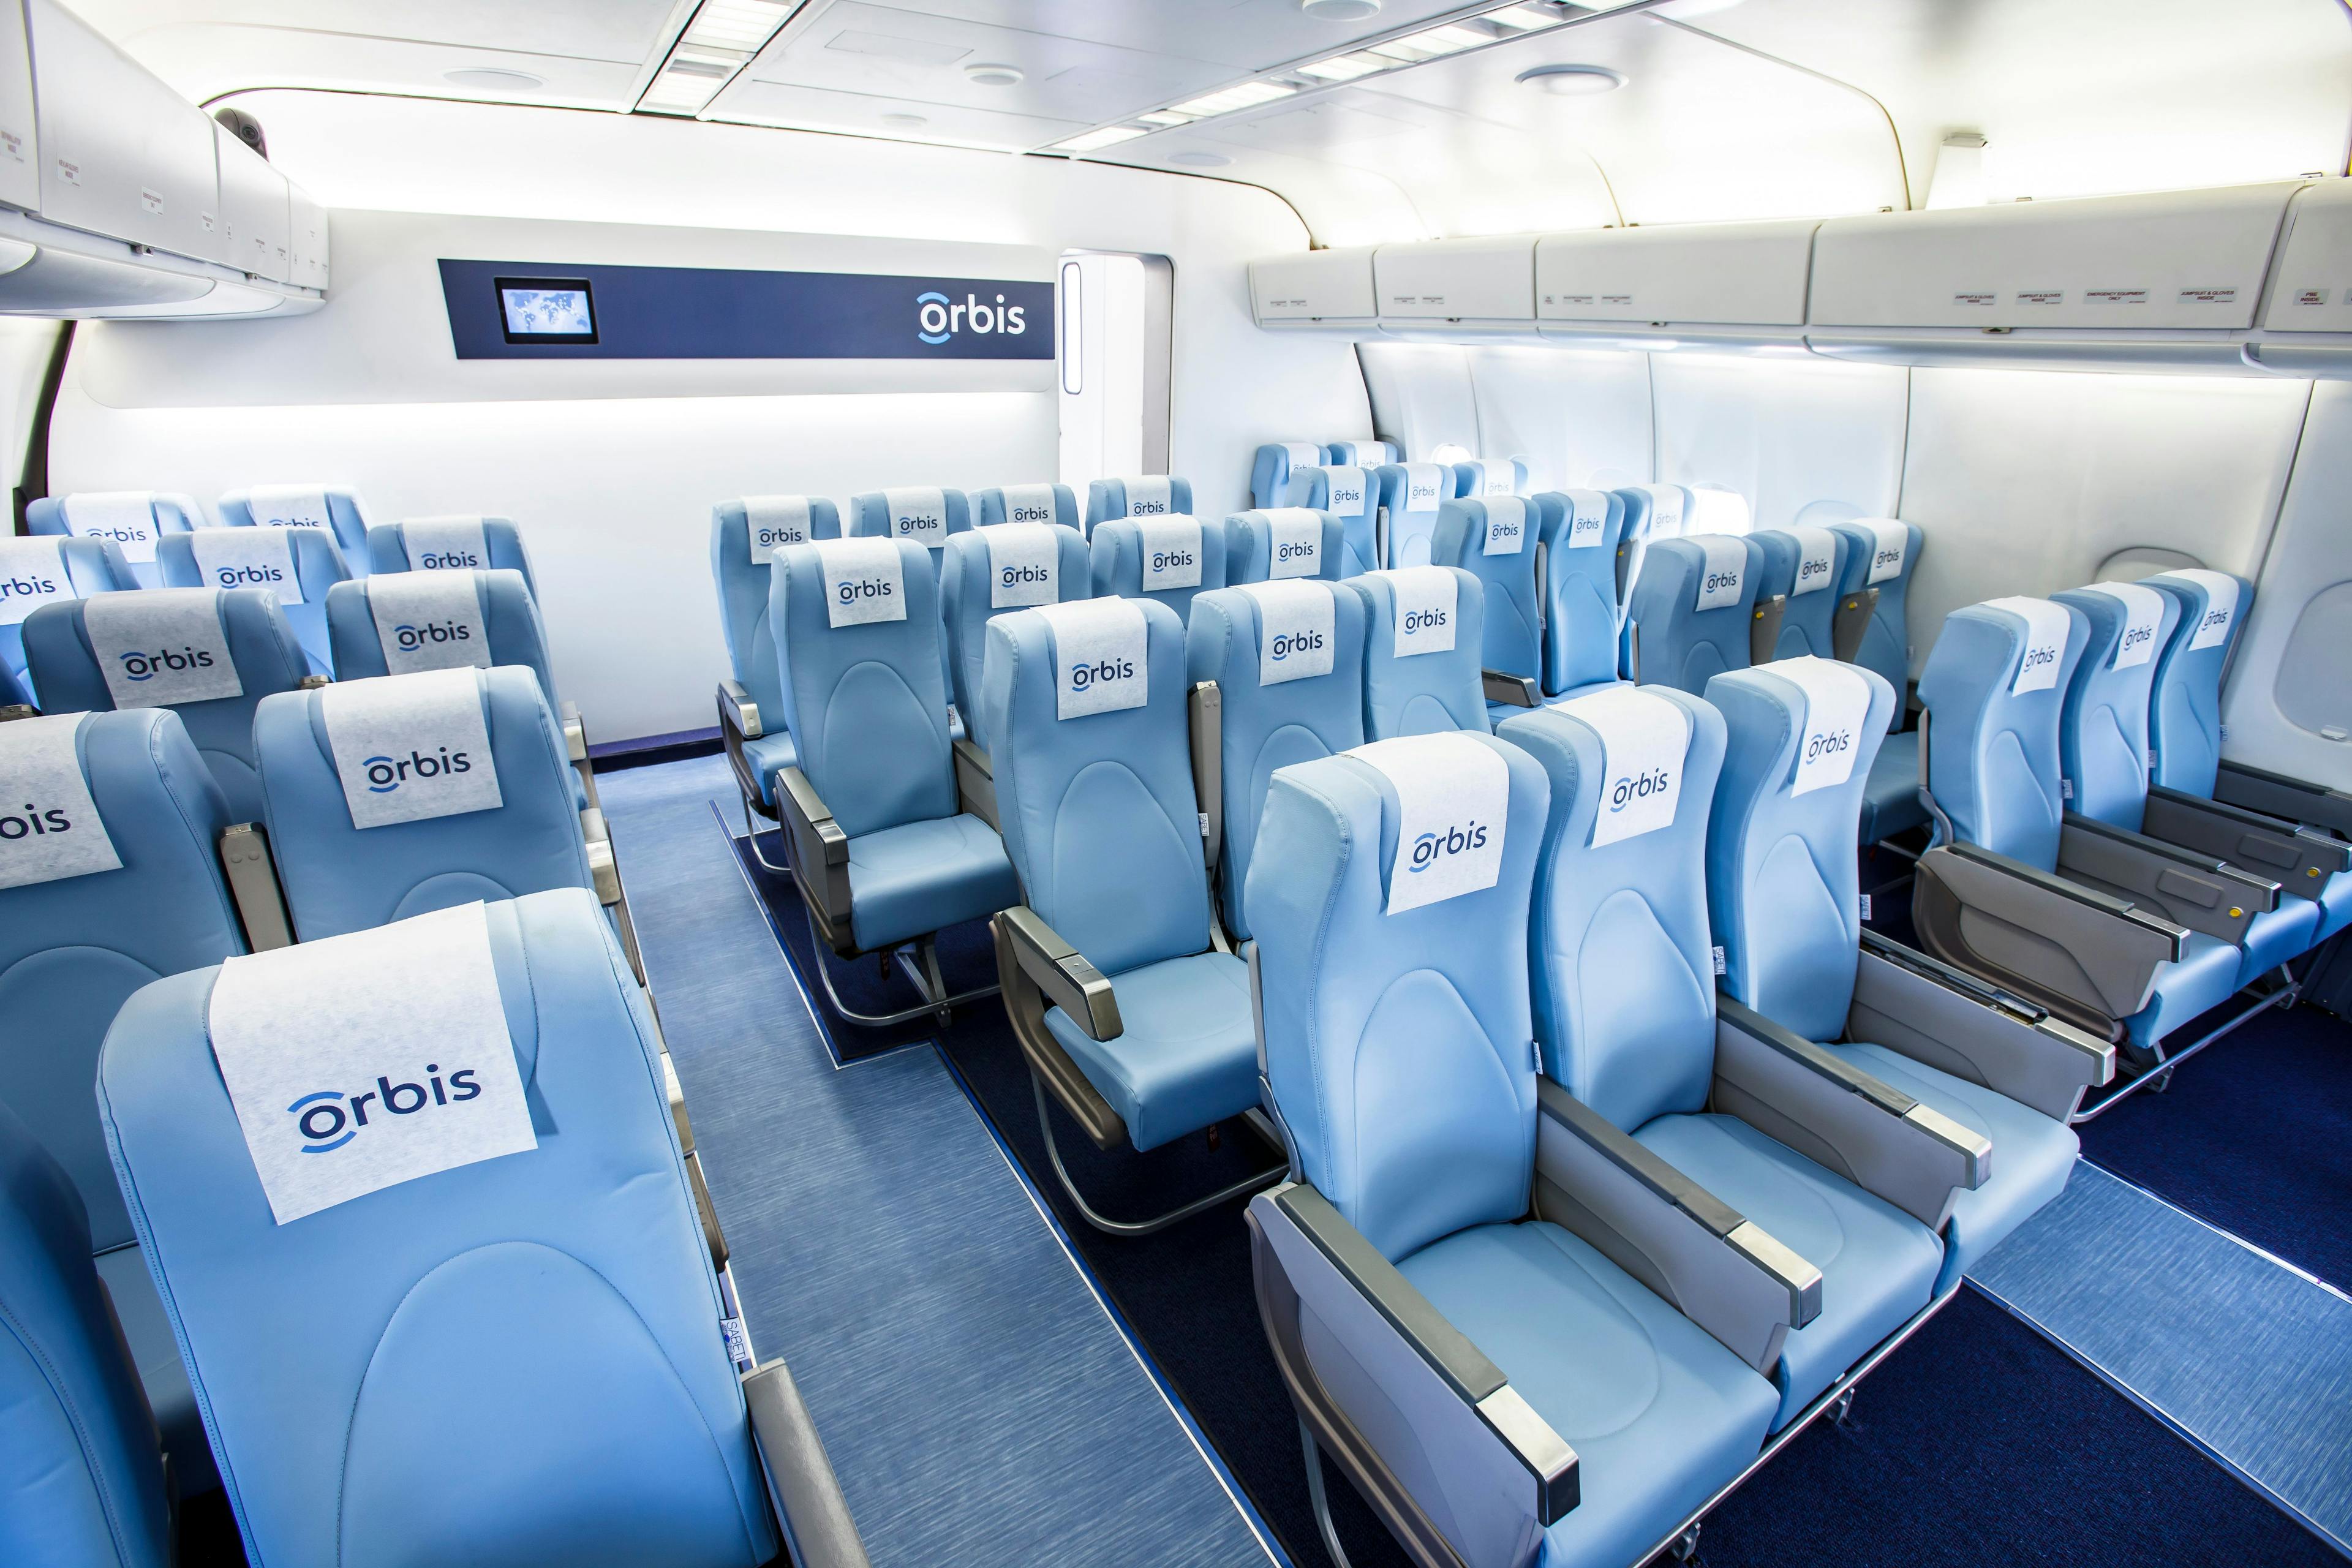 This passenger area aboard the Orbis Flying Eye Hospital doubles as a classroom when the aircraft is on the ground. (All images courtesy of Geoff Oliver Bugbee/Orbis)